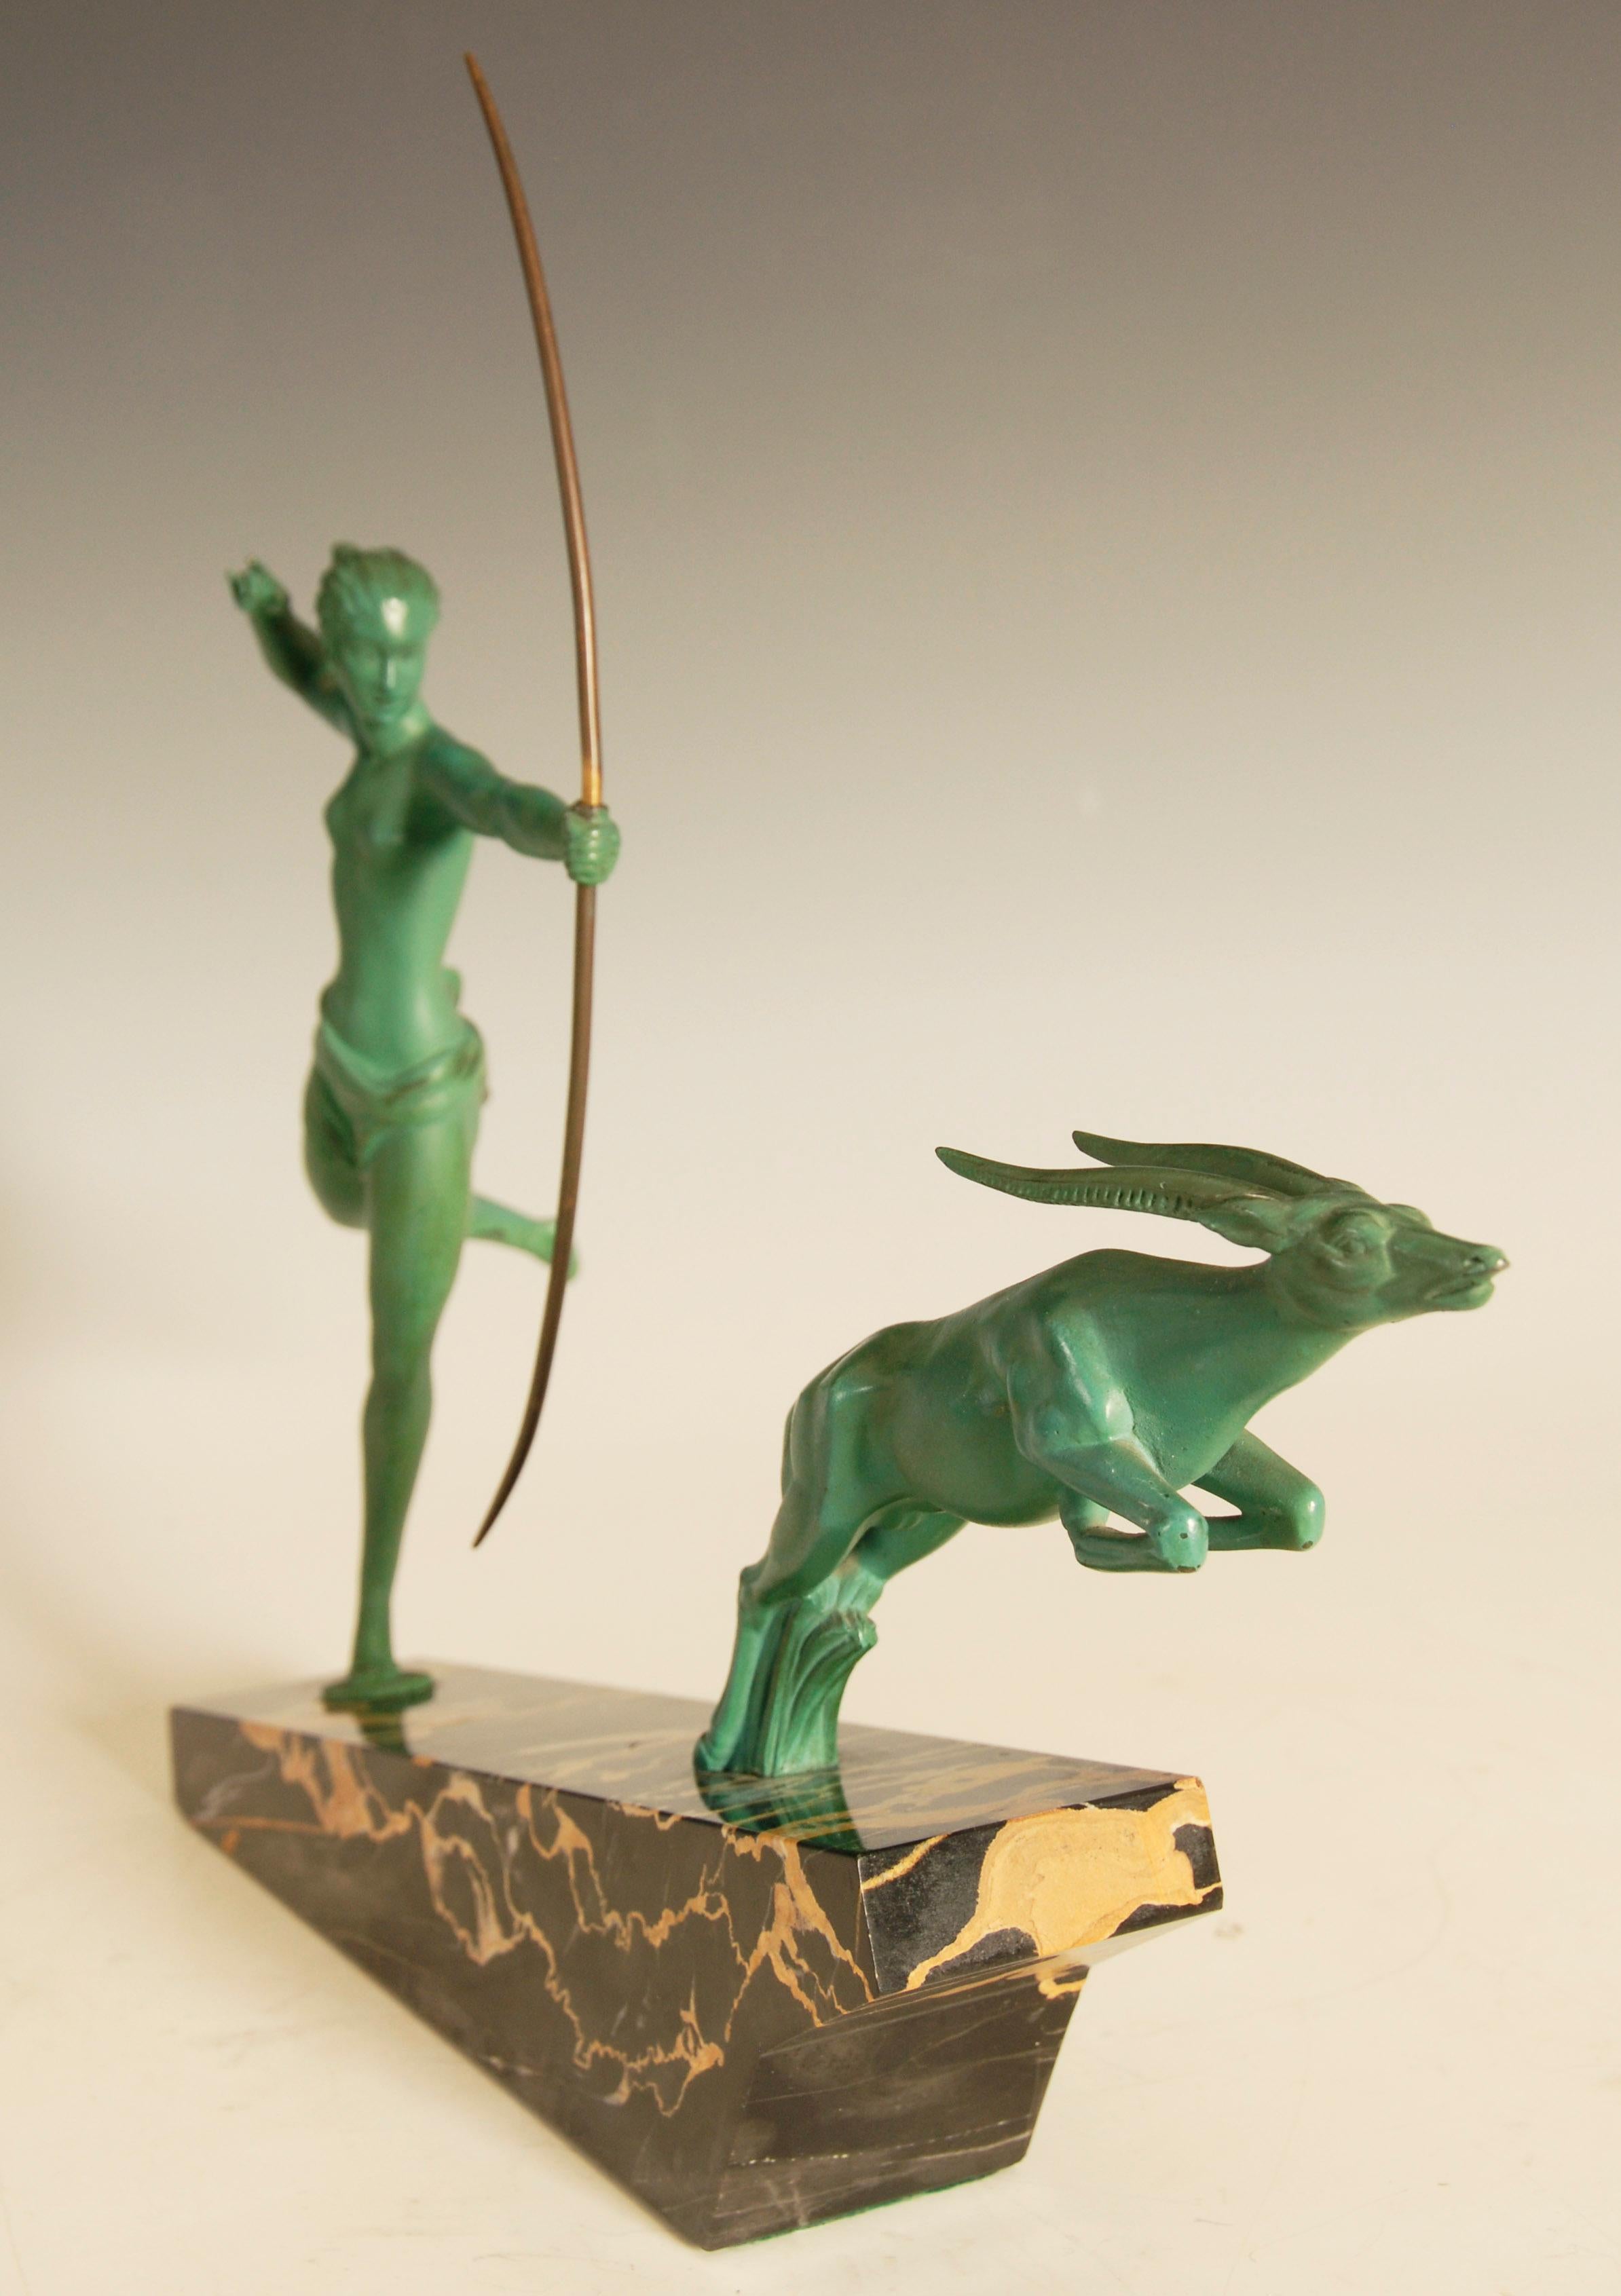 French Art Deco Sculpture 'Atalante' from Max Le Verrier Foundry, Paris For Sale